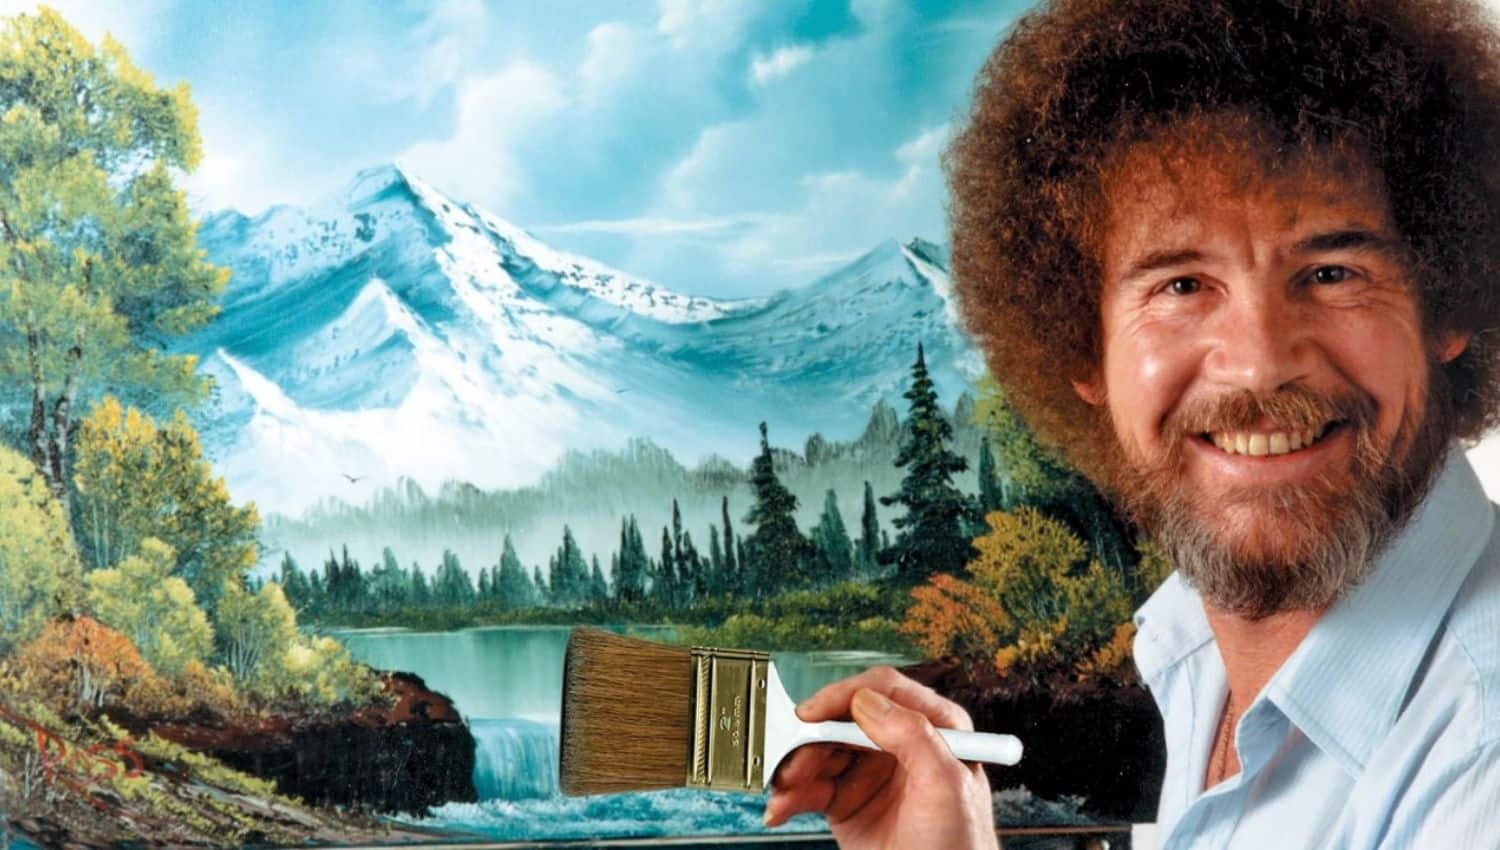 A middle aged Caucasian man with a fro named Bob Ross paints a colorful mountain landscape and smiles